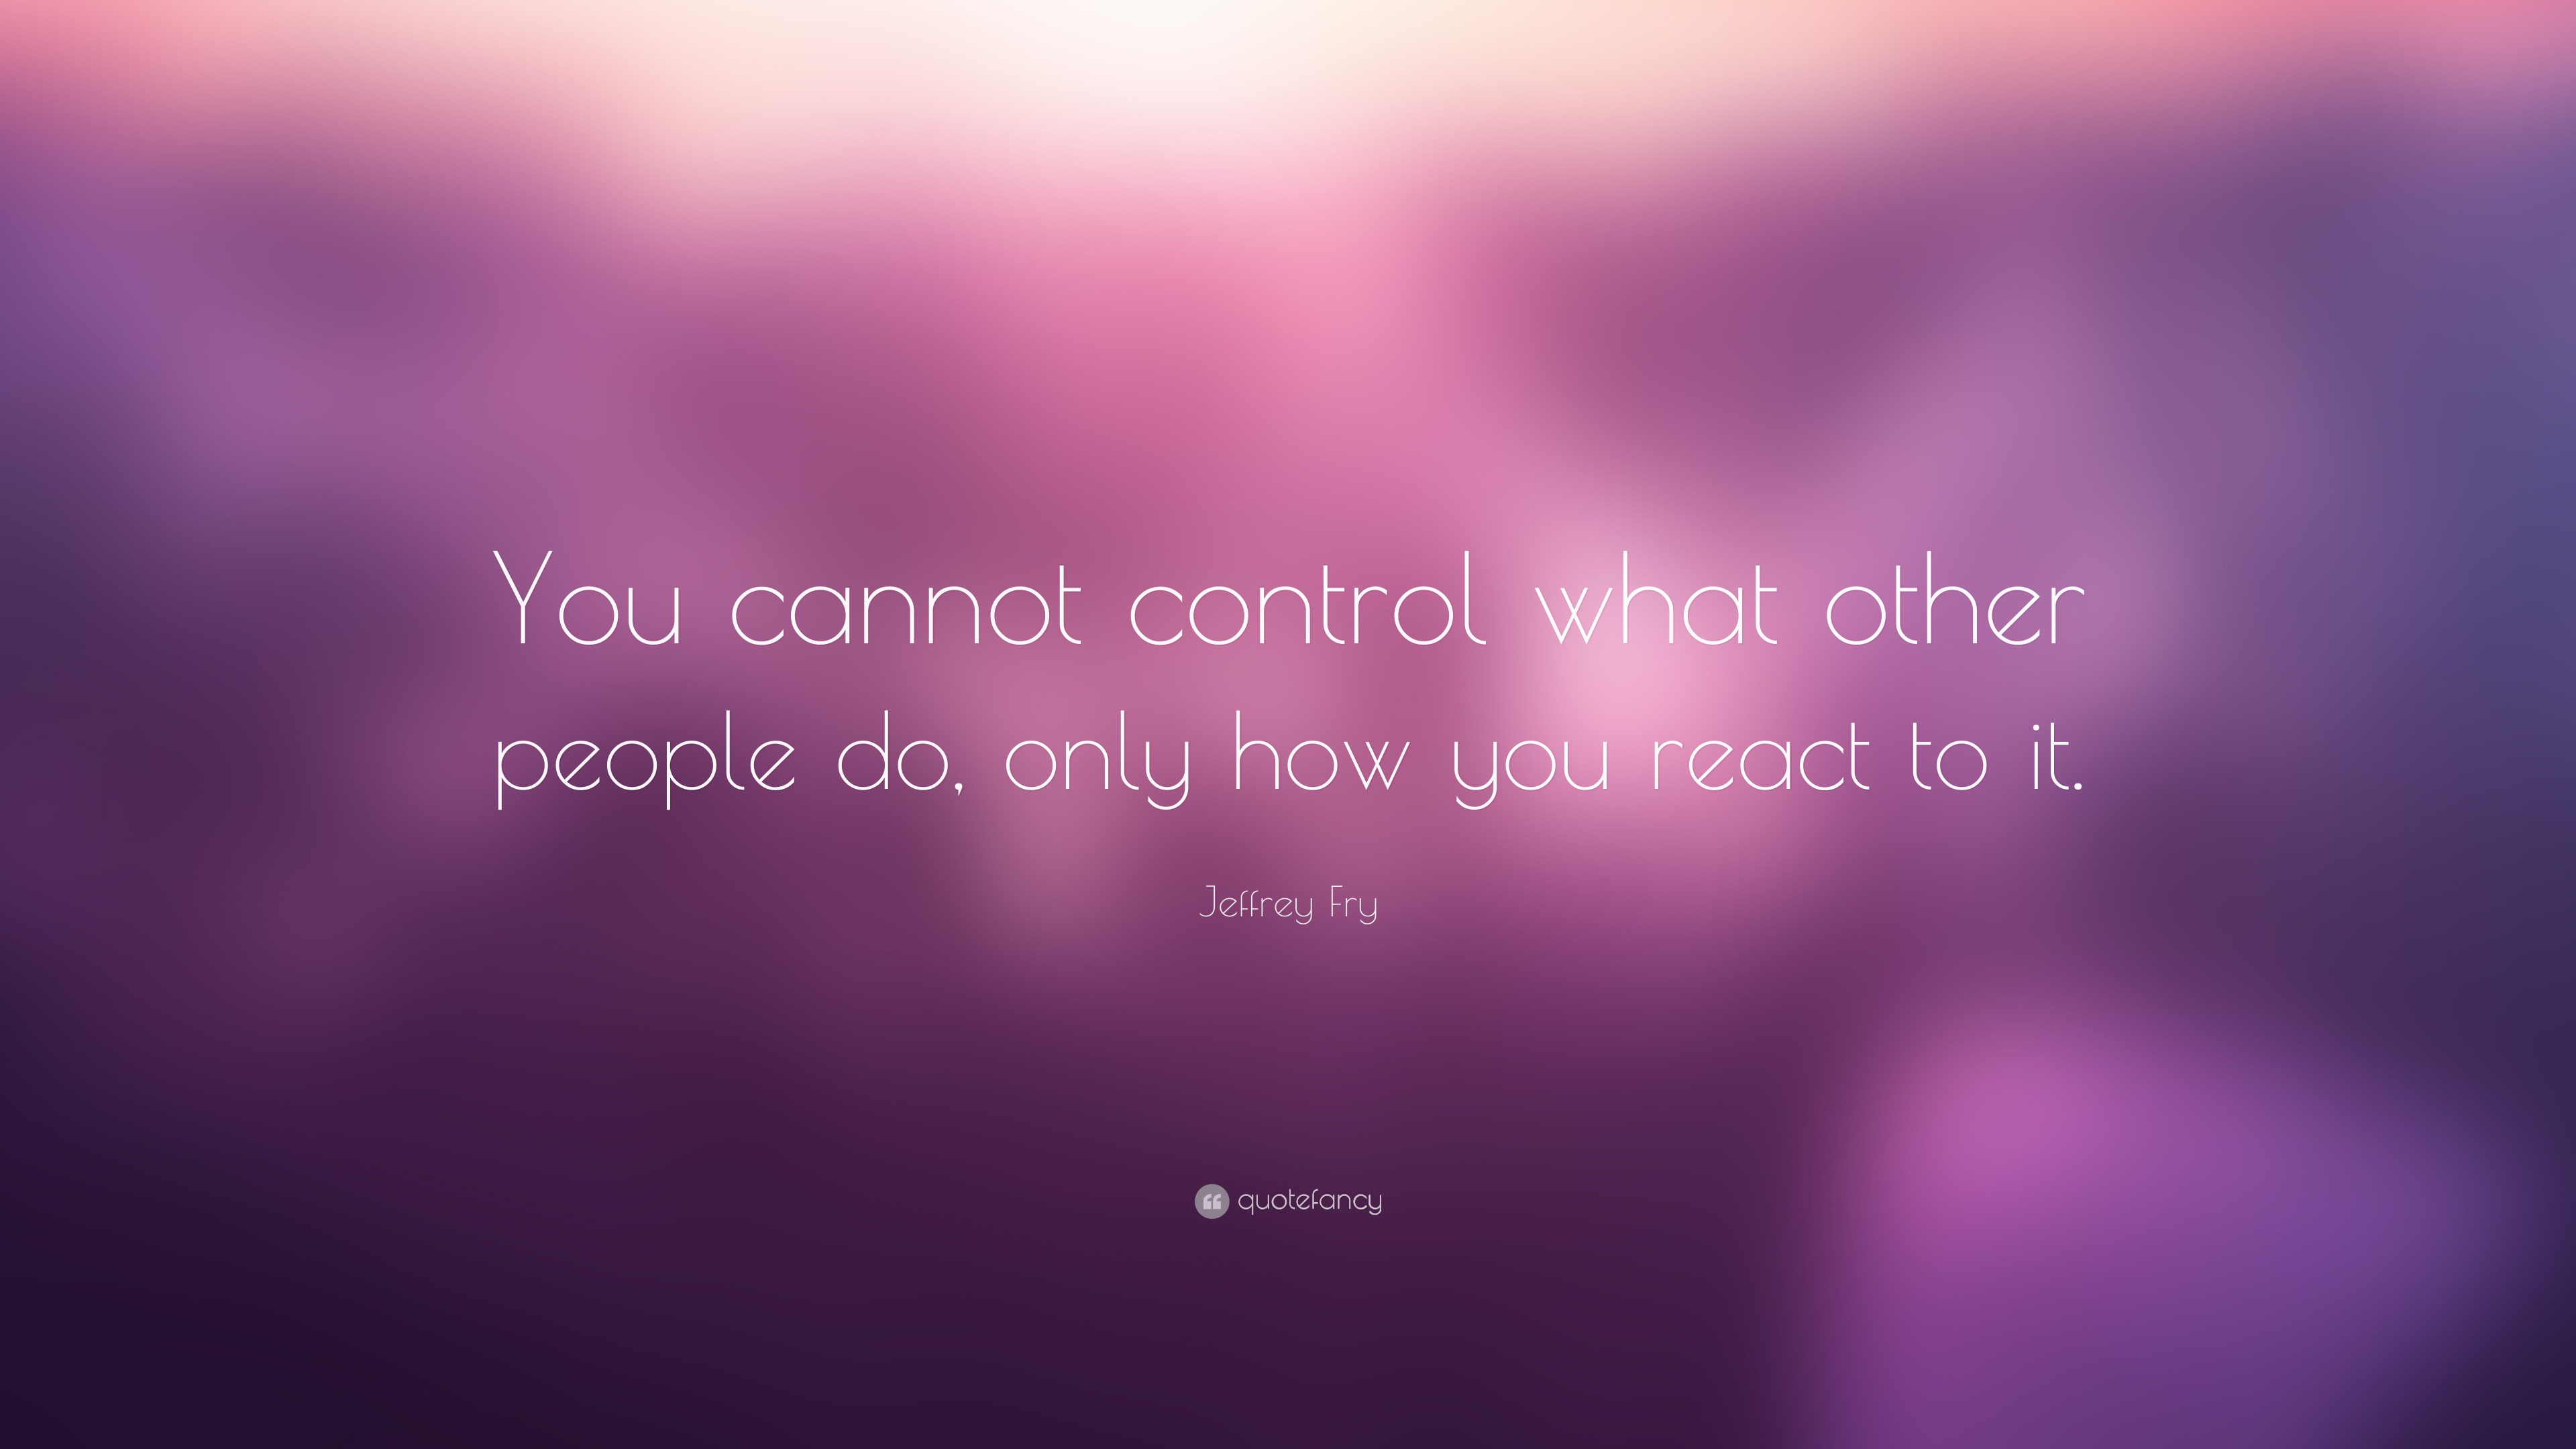 Jeffrey Fry Quote “you Cannot Control What Other People Do Only How You React To It” 